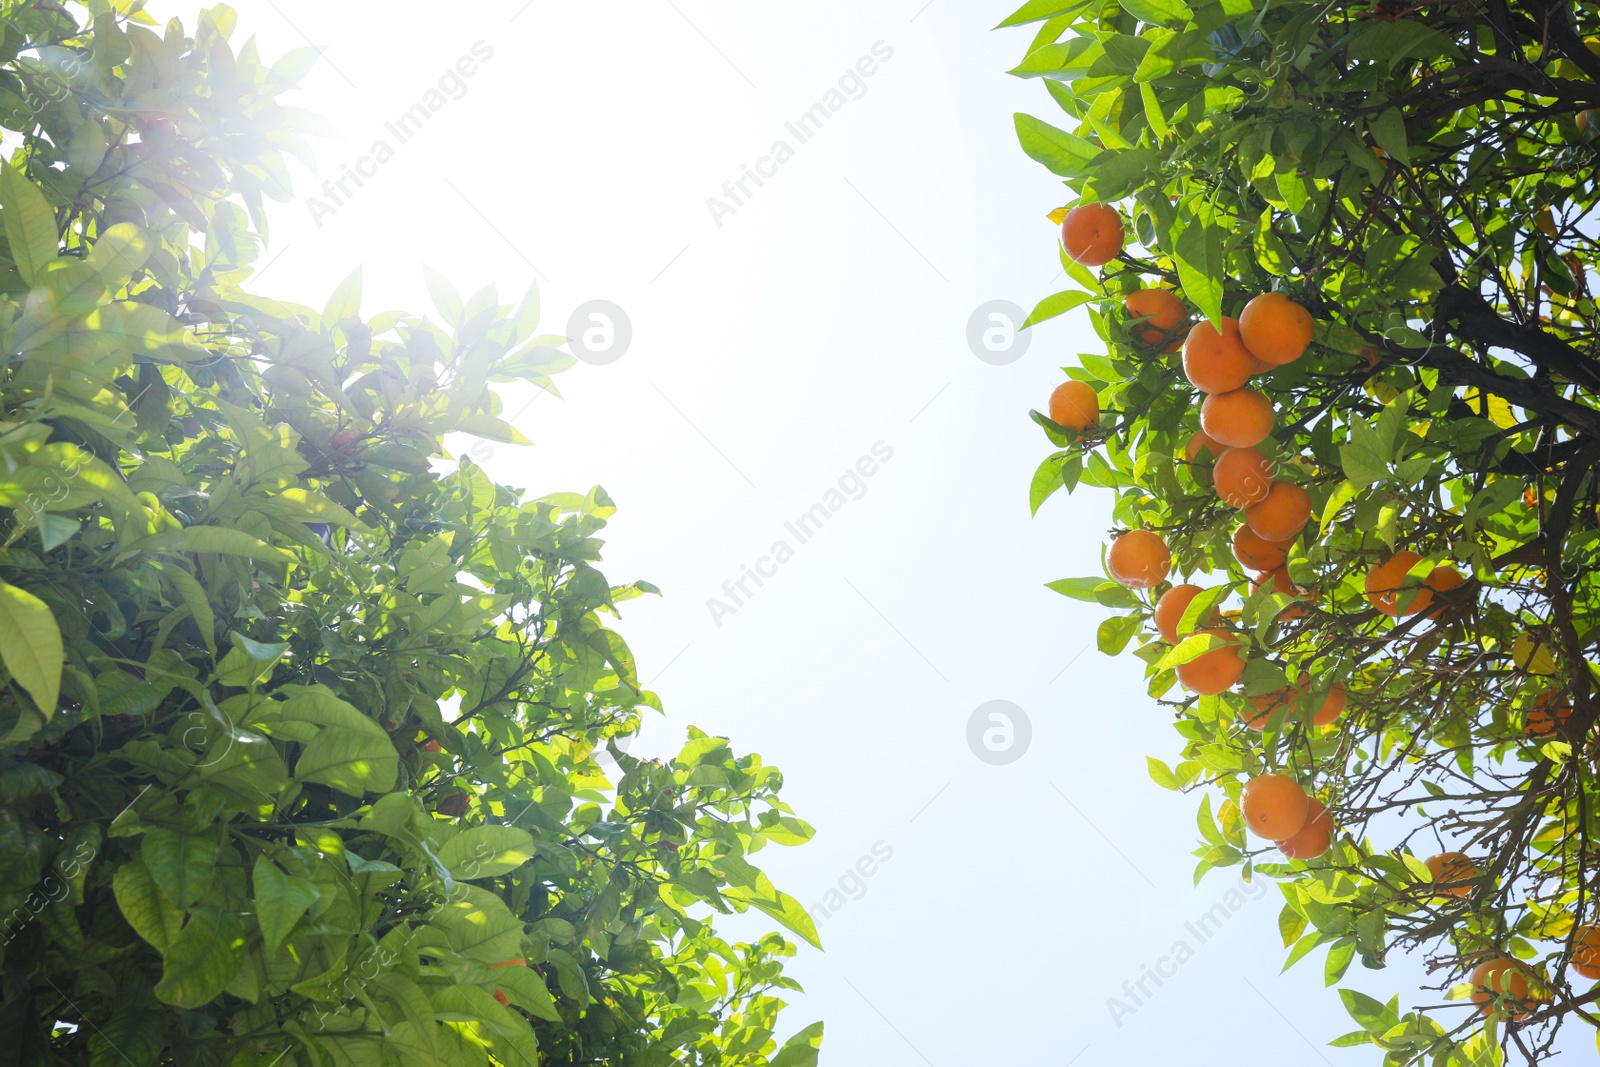 Photo of Bright green orange trees with fruits against blue sky on sunny day, view from below